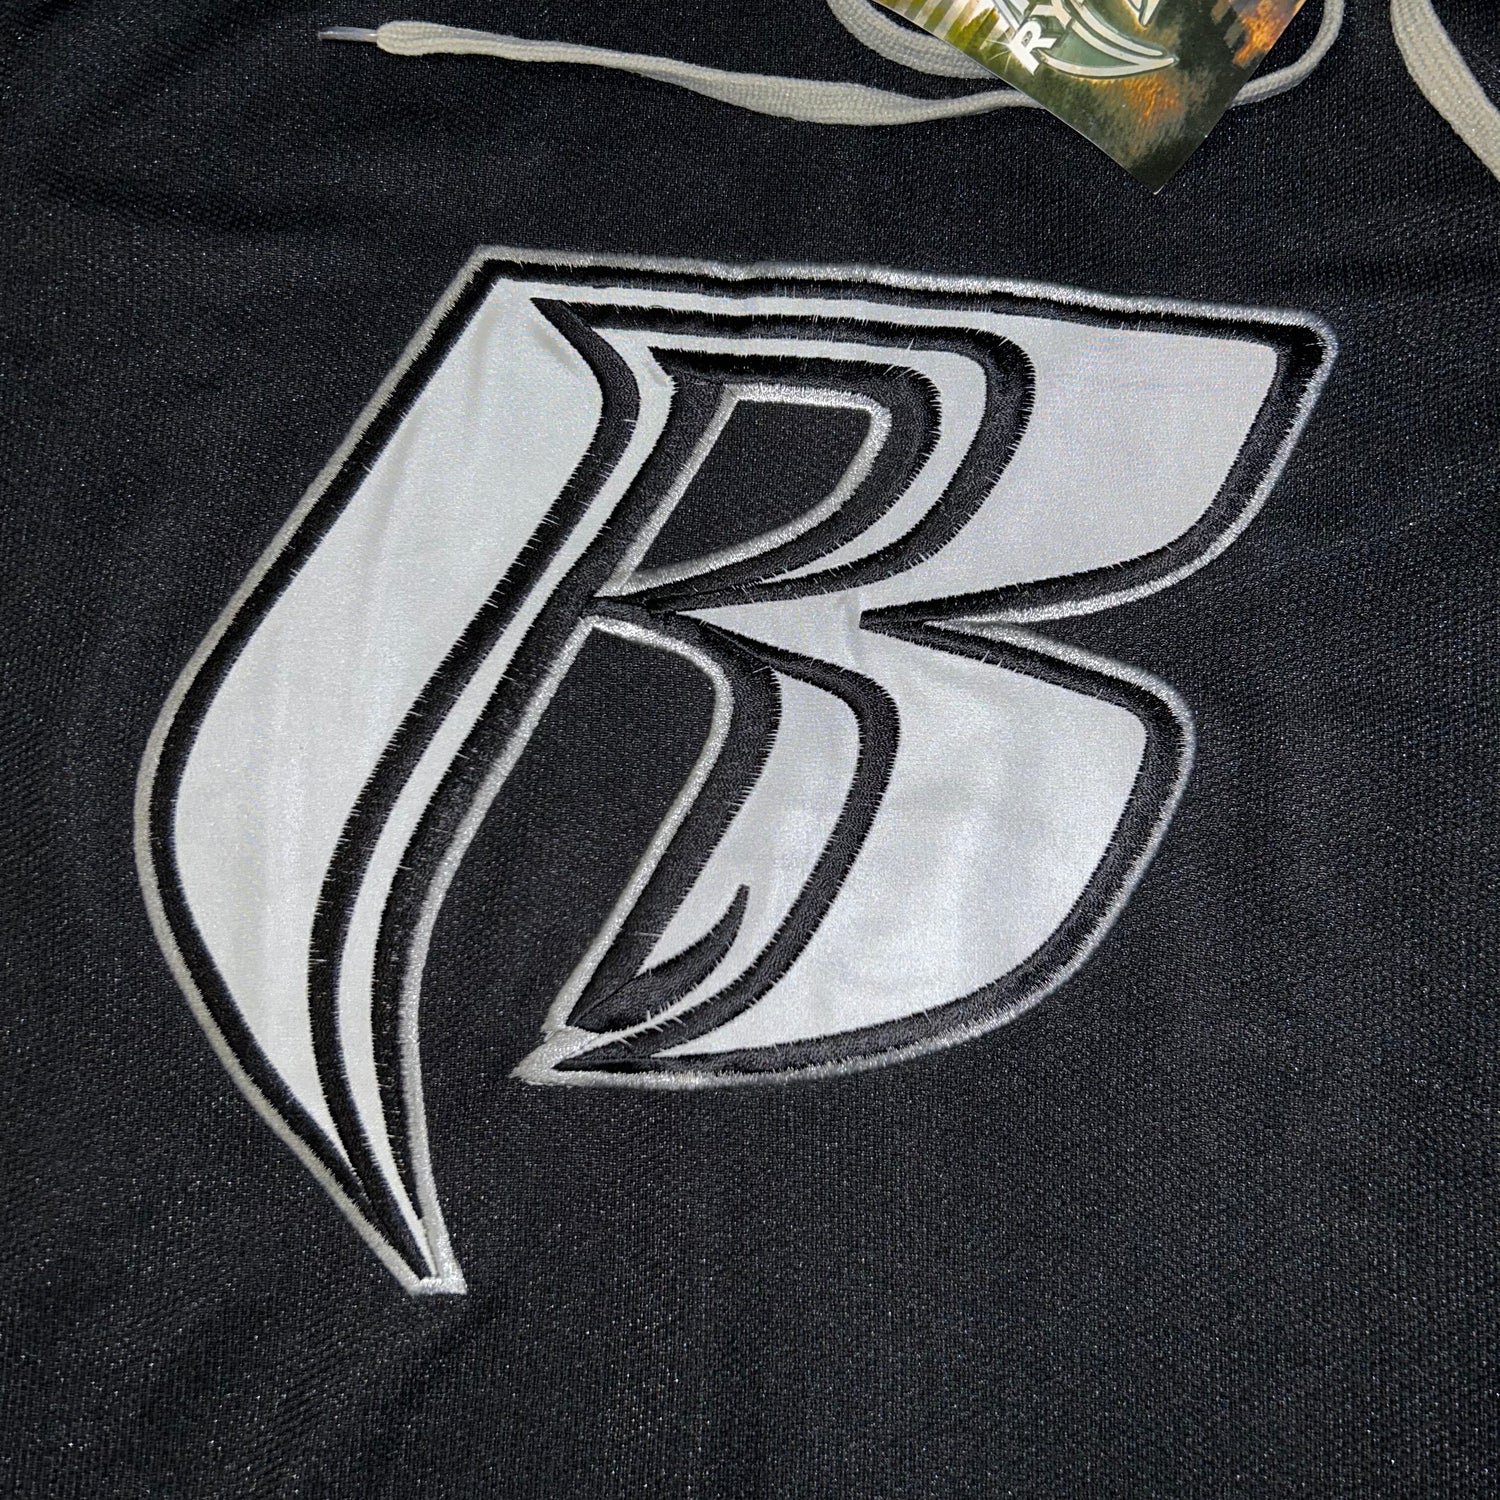 Jersey Ruff Ryders Vintage  (S)